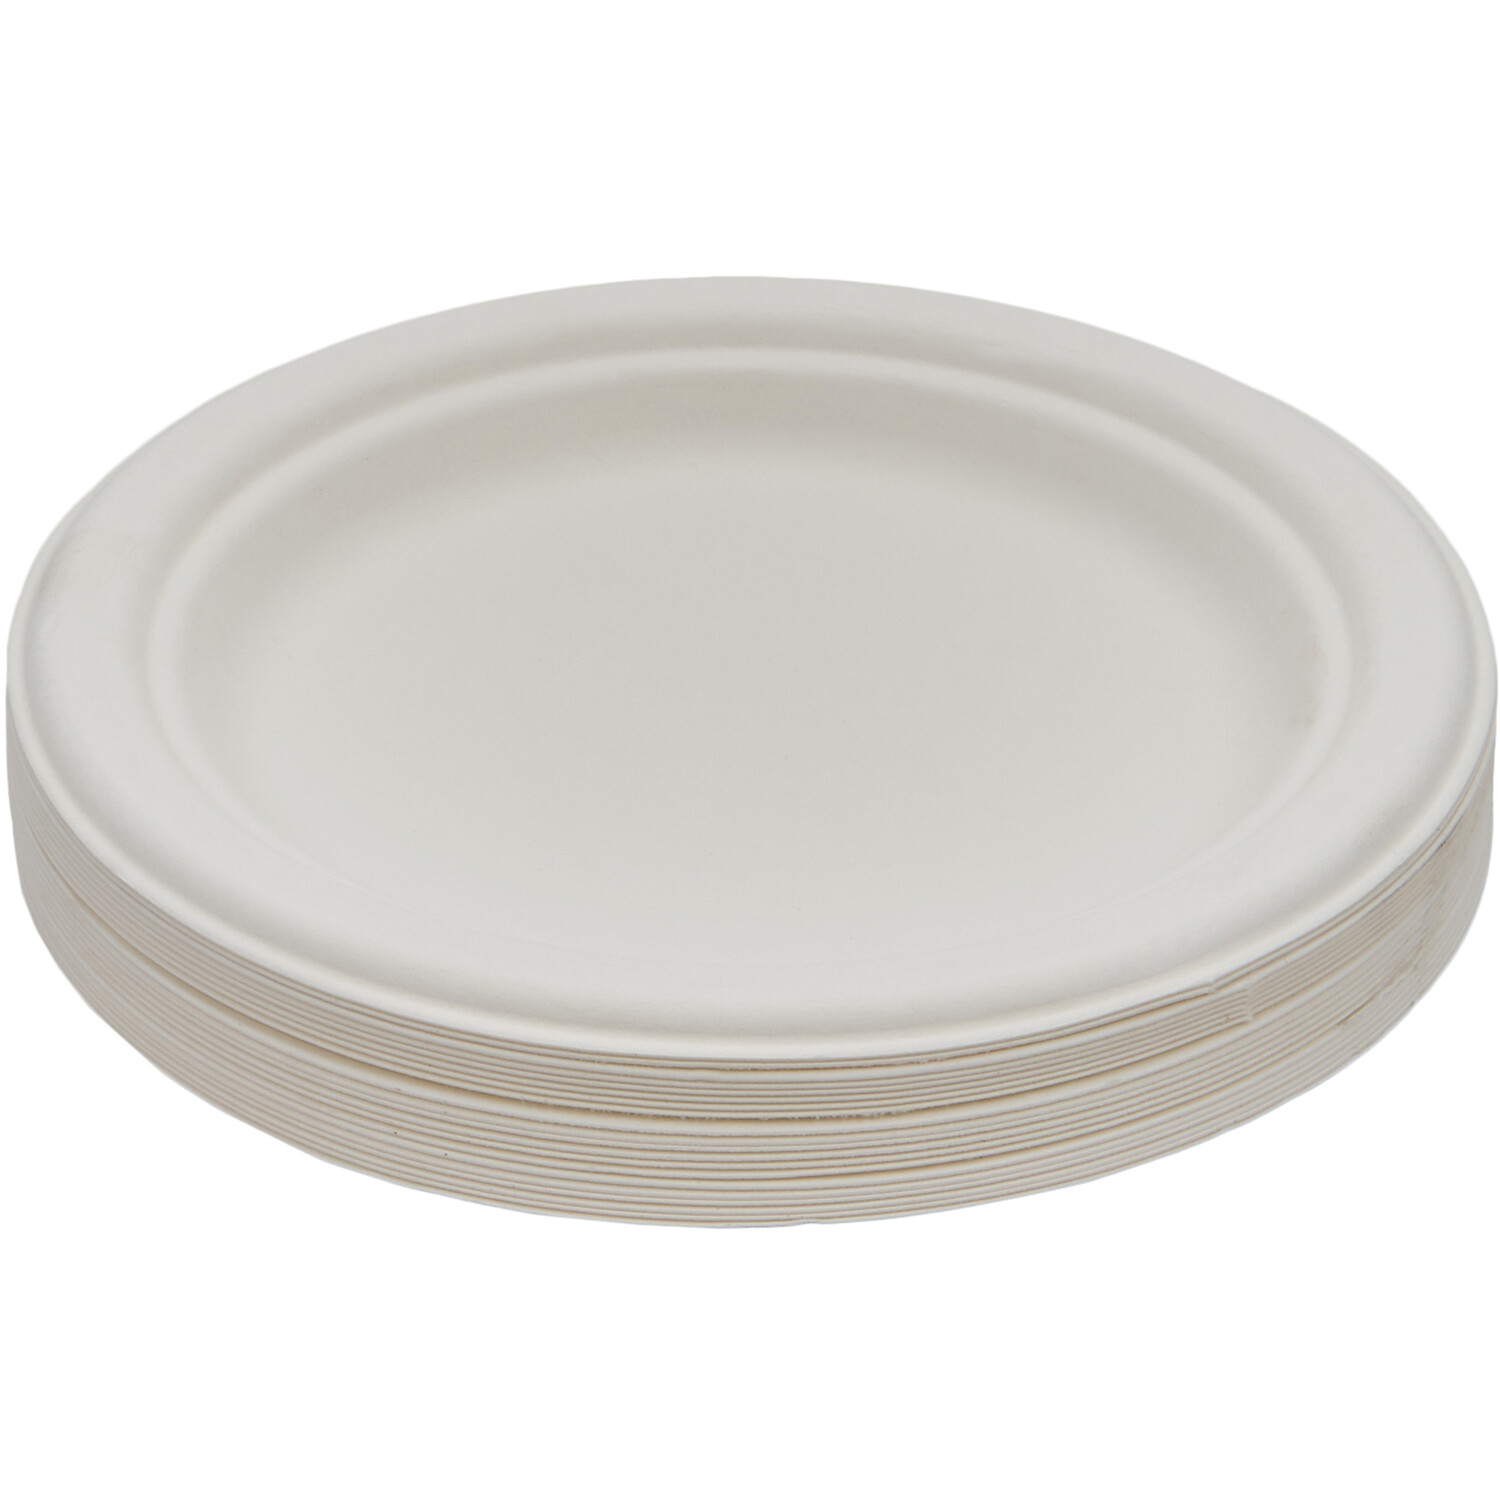 Pack of 20 Bagasse Plates - White Image 1